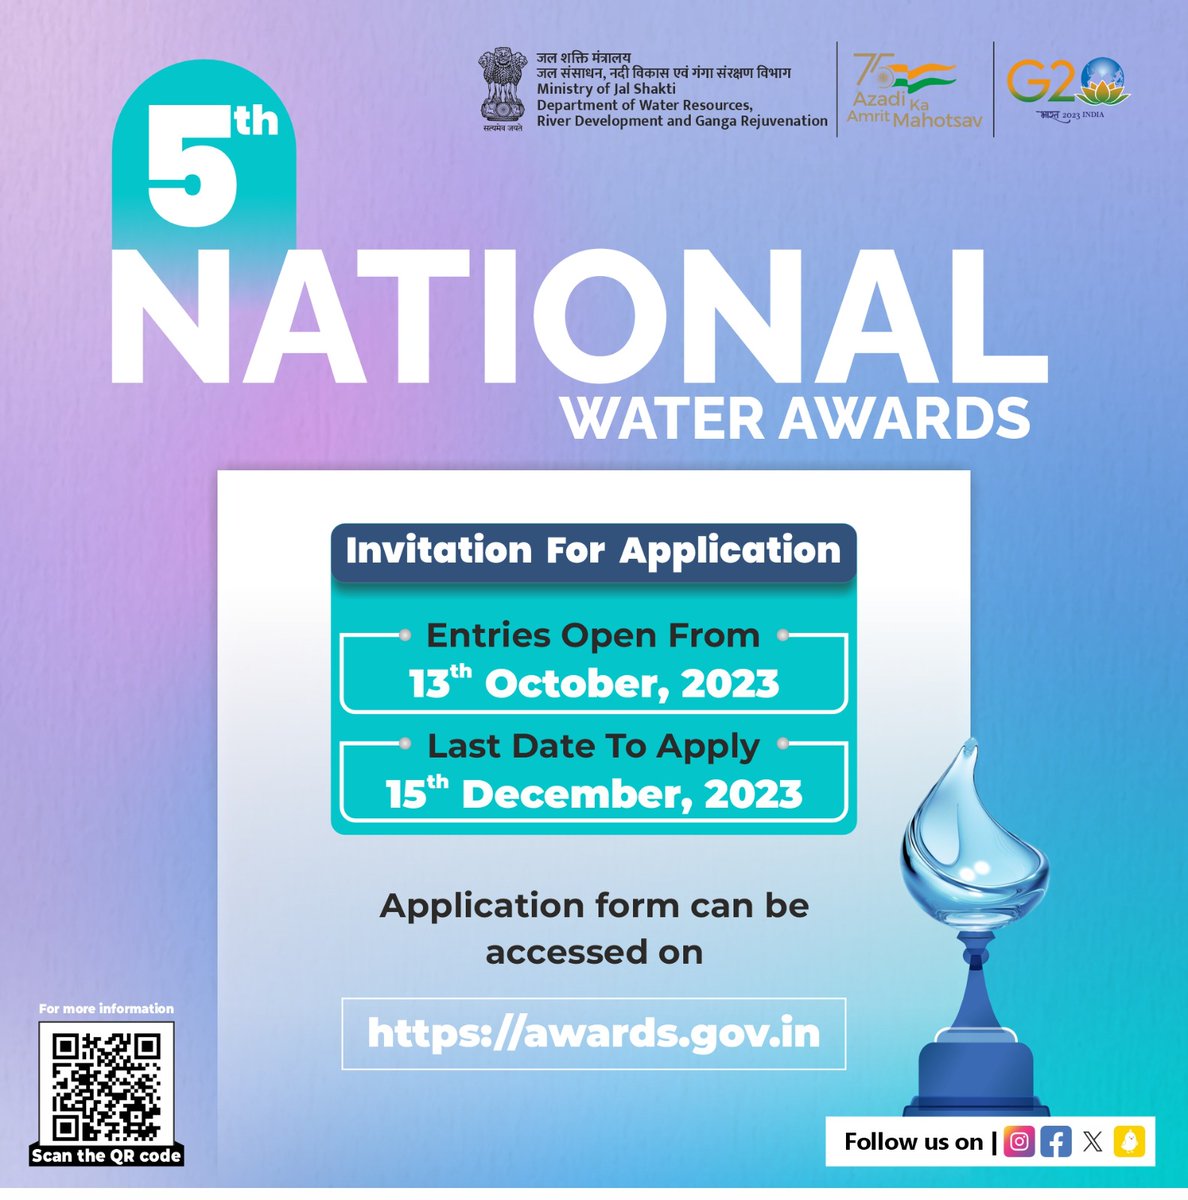 Calling all #water #champions! The @MoJSDoWRRDGR is here with the 5th #NationalWaterAwards. Don't miss your chance to shine. Register early, be contributor of #waterconservation & be recognized on a national stage.
#WaterChampions #RegisterNow #JalShakti #WaterAwards2023 #NWA2023